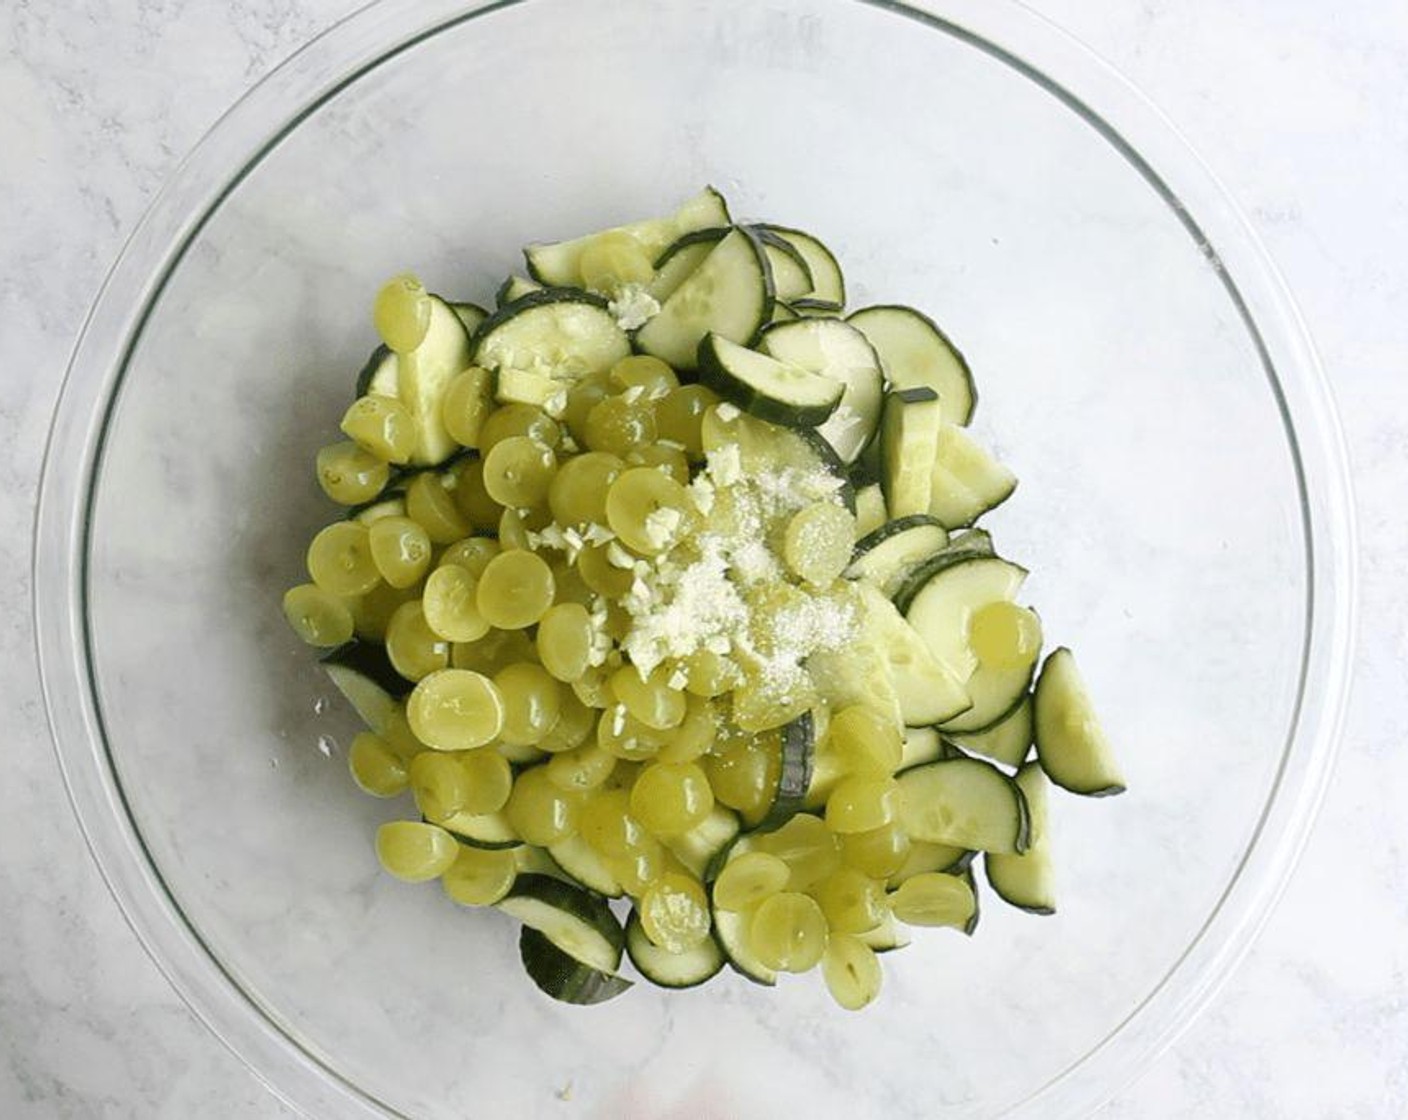 step 1 Make the gazpacho: In a large bowl, combine the English Cucumber (1), White Seedless Grapes (1 1/2 cups), and Garlic (1 clove). Add Kosher Salt (1 tsp), and White Balsamic Vinegar (1/4 cup) toss to coat, then set aside to marinate for 20 minutes.